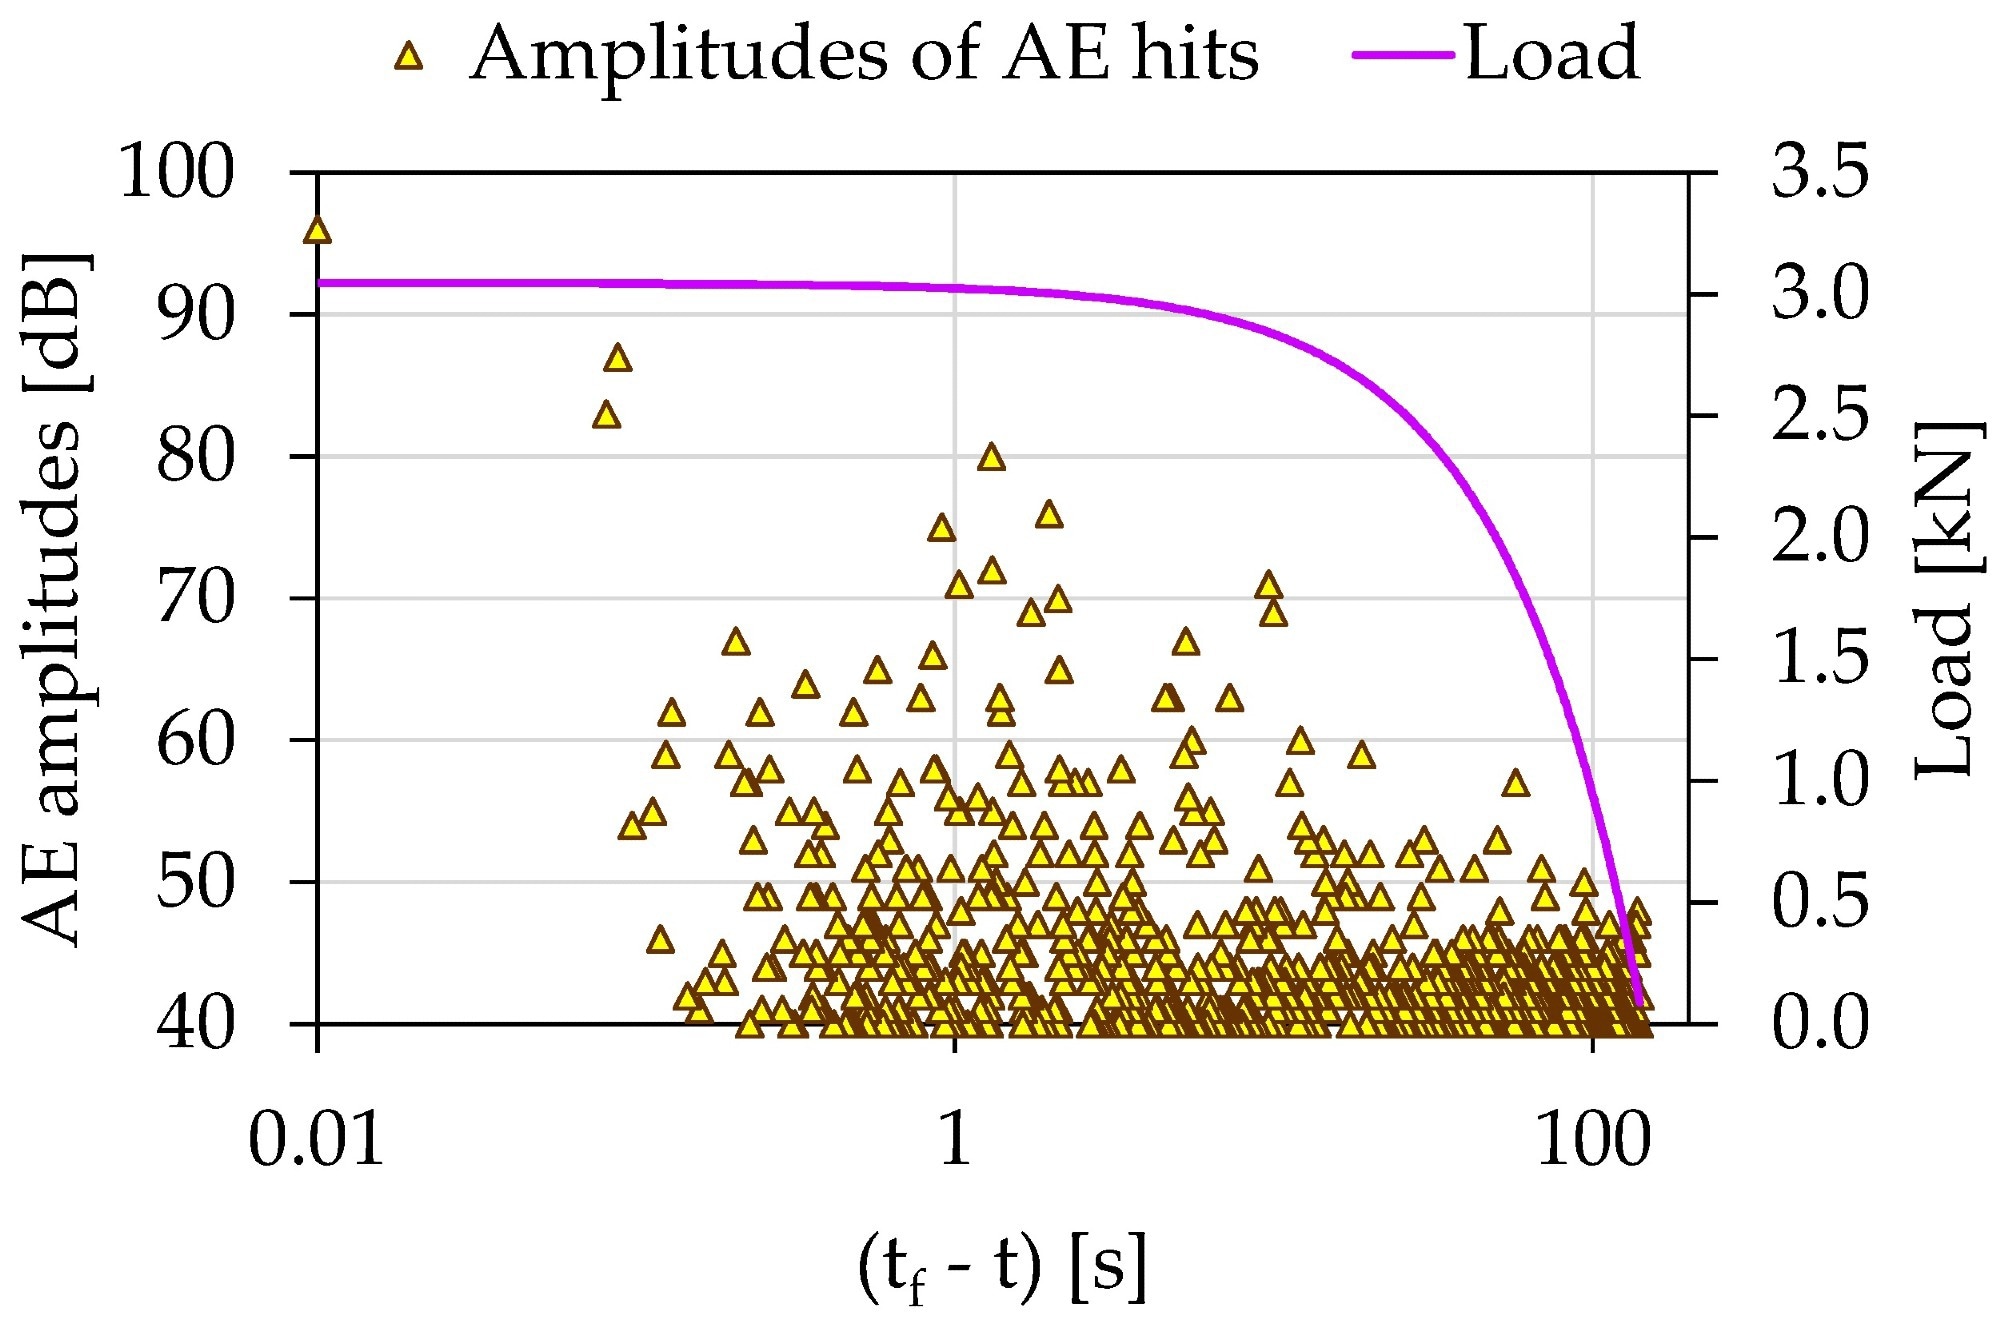 The temporal evolution of AE amplitudes in juxtaposition to the load applied for the experiment Exp-LR01 in terms of the “time-to-failure” parameter.